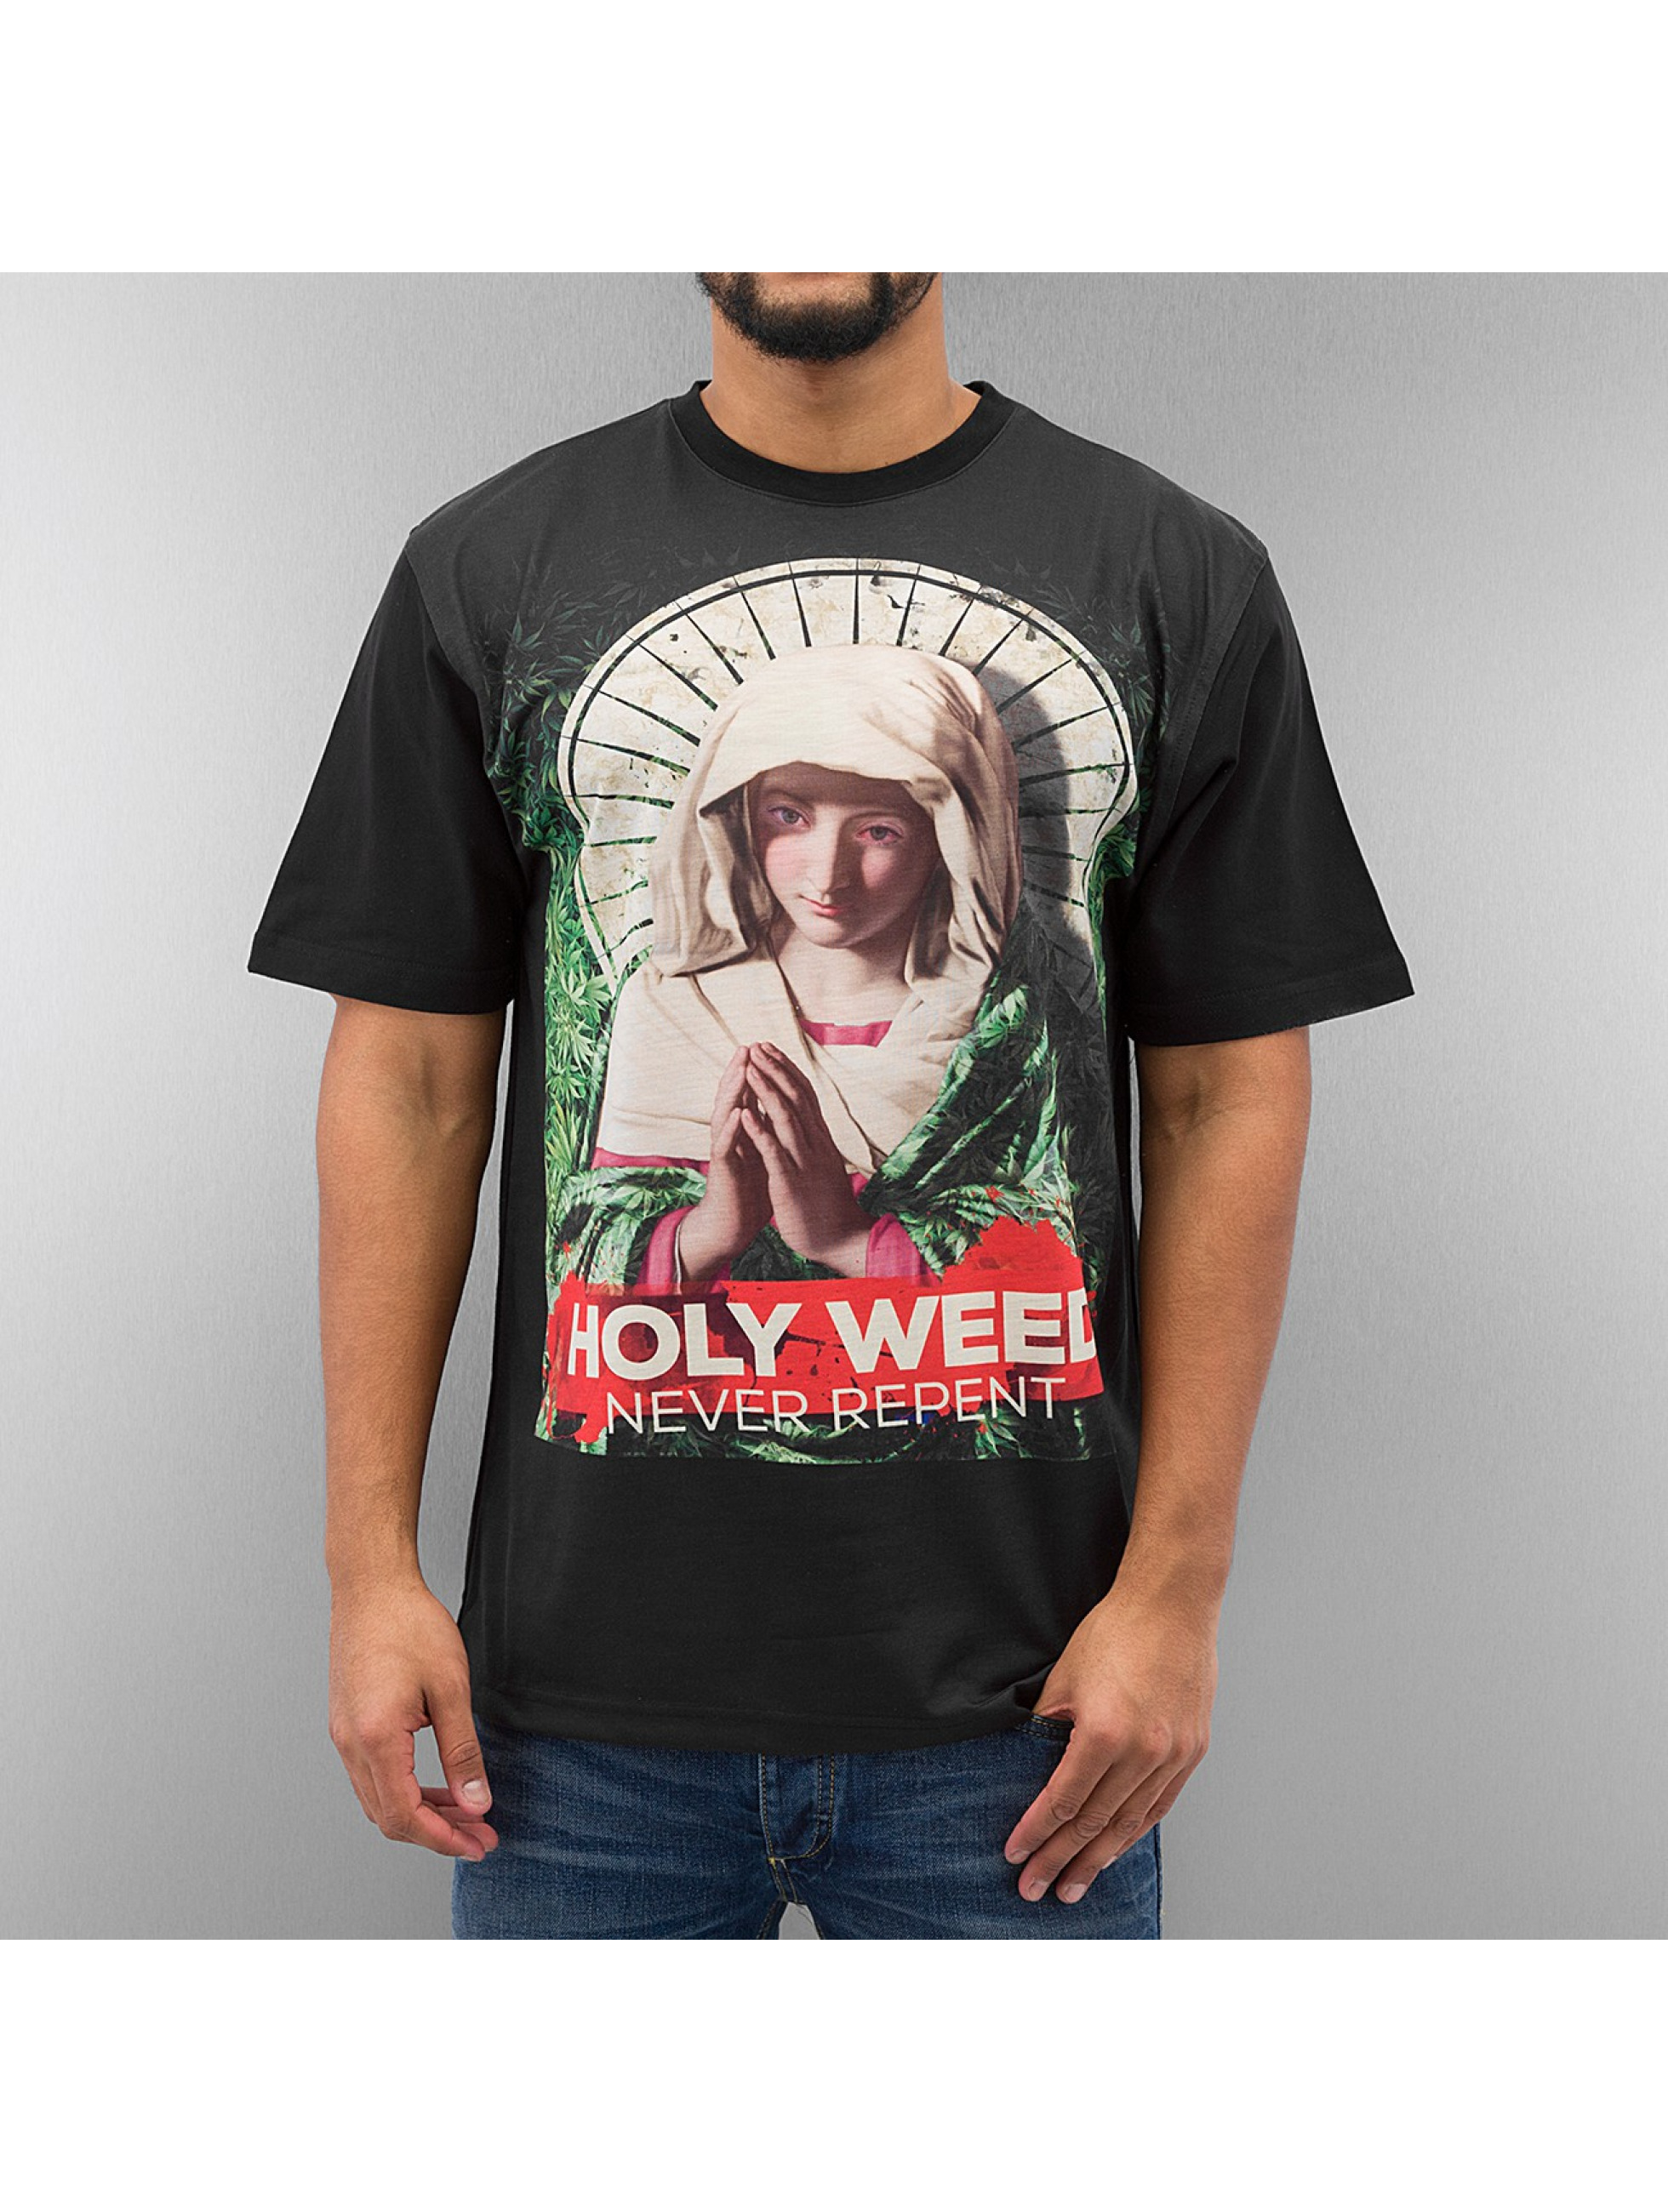 T-Shirt Holy Weed in schwarz